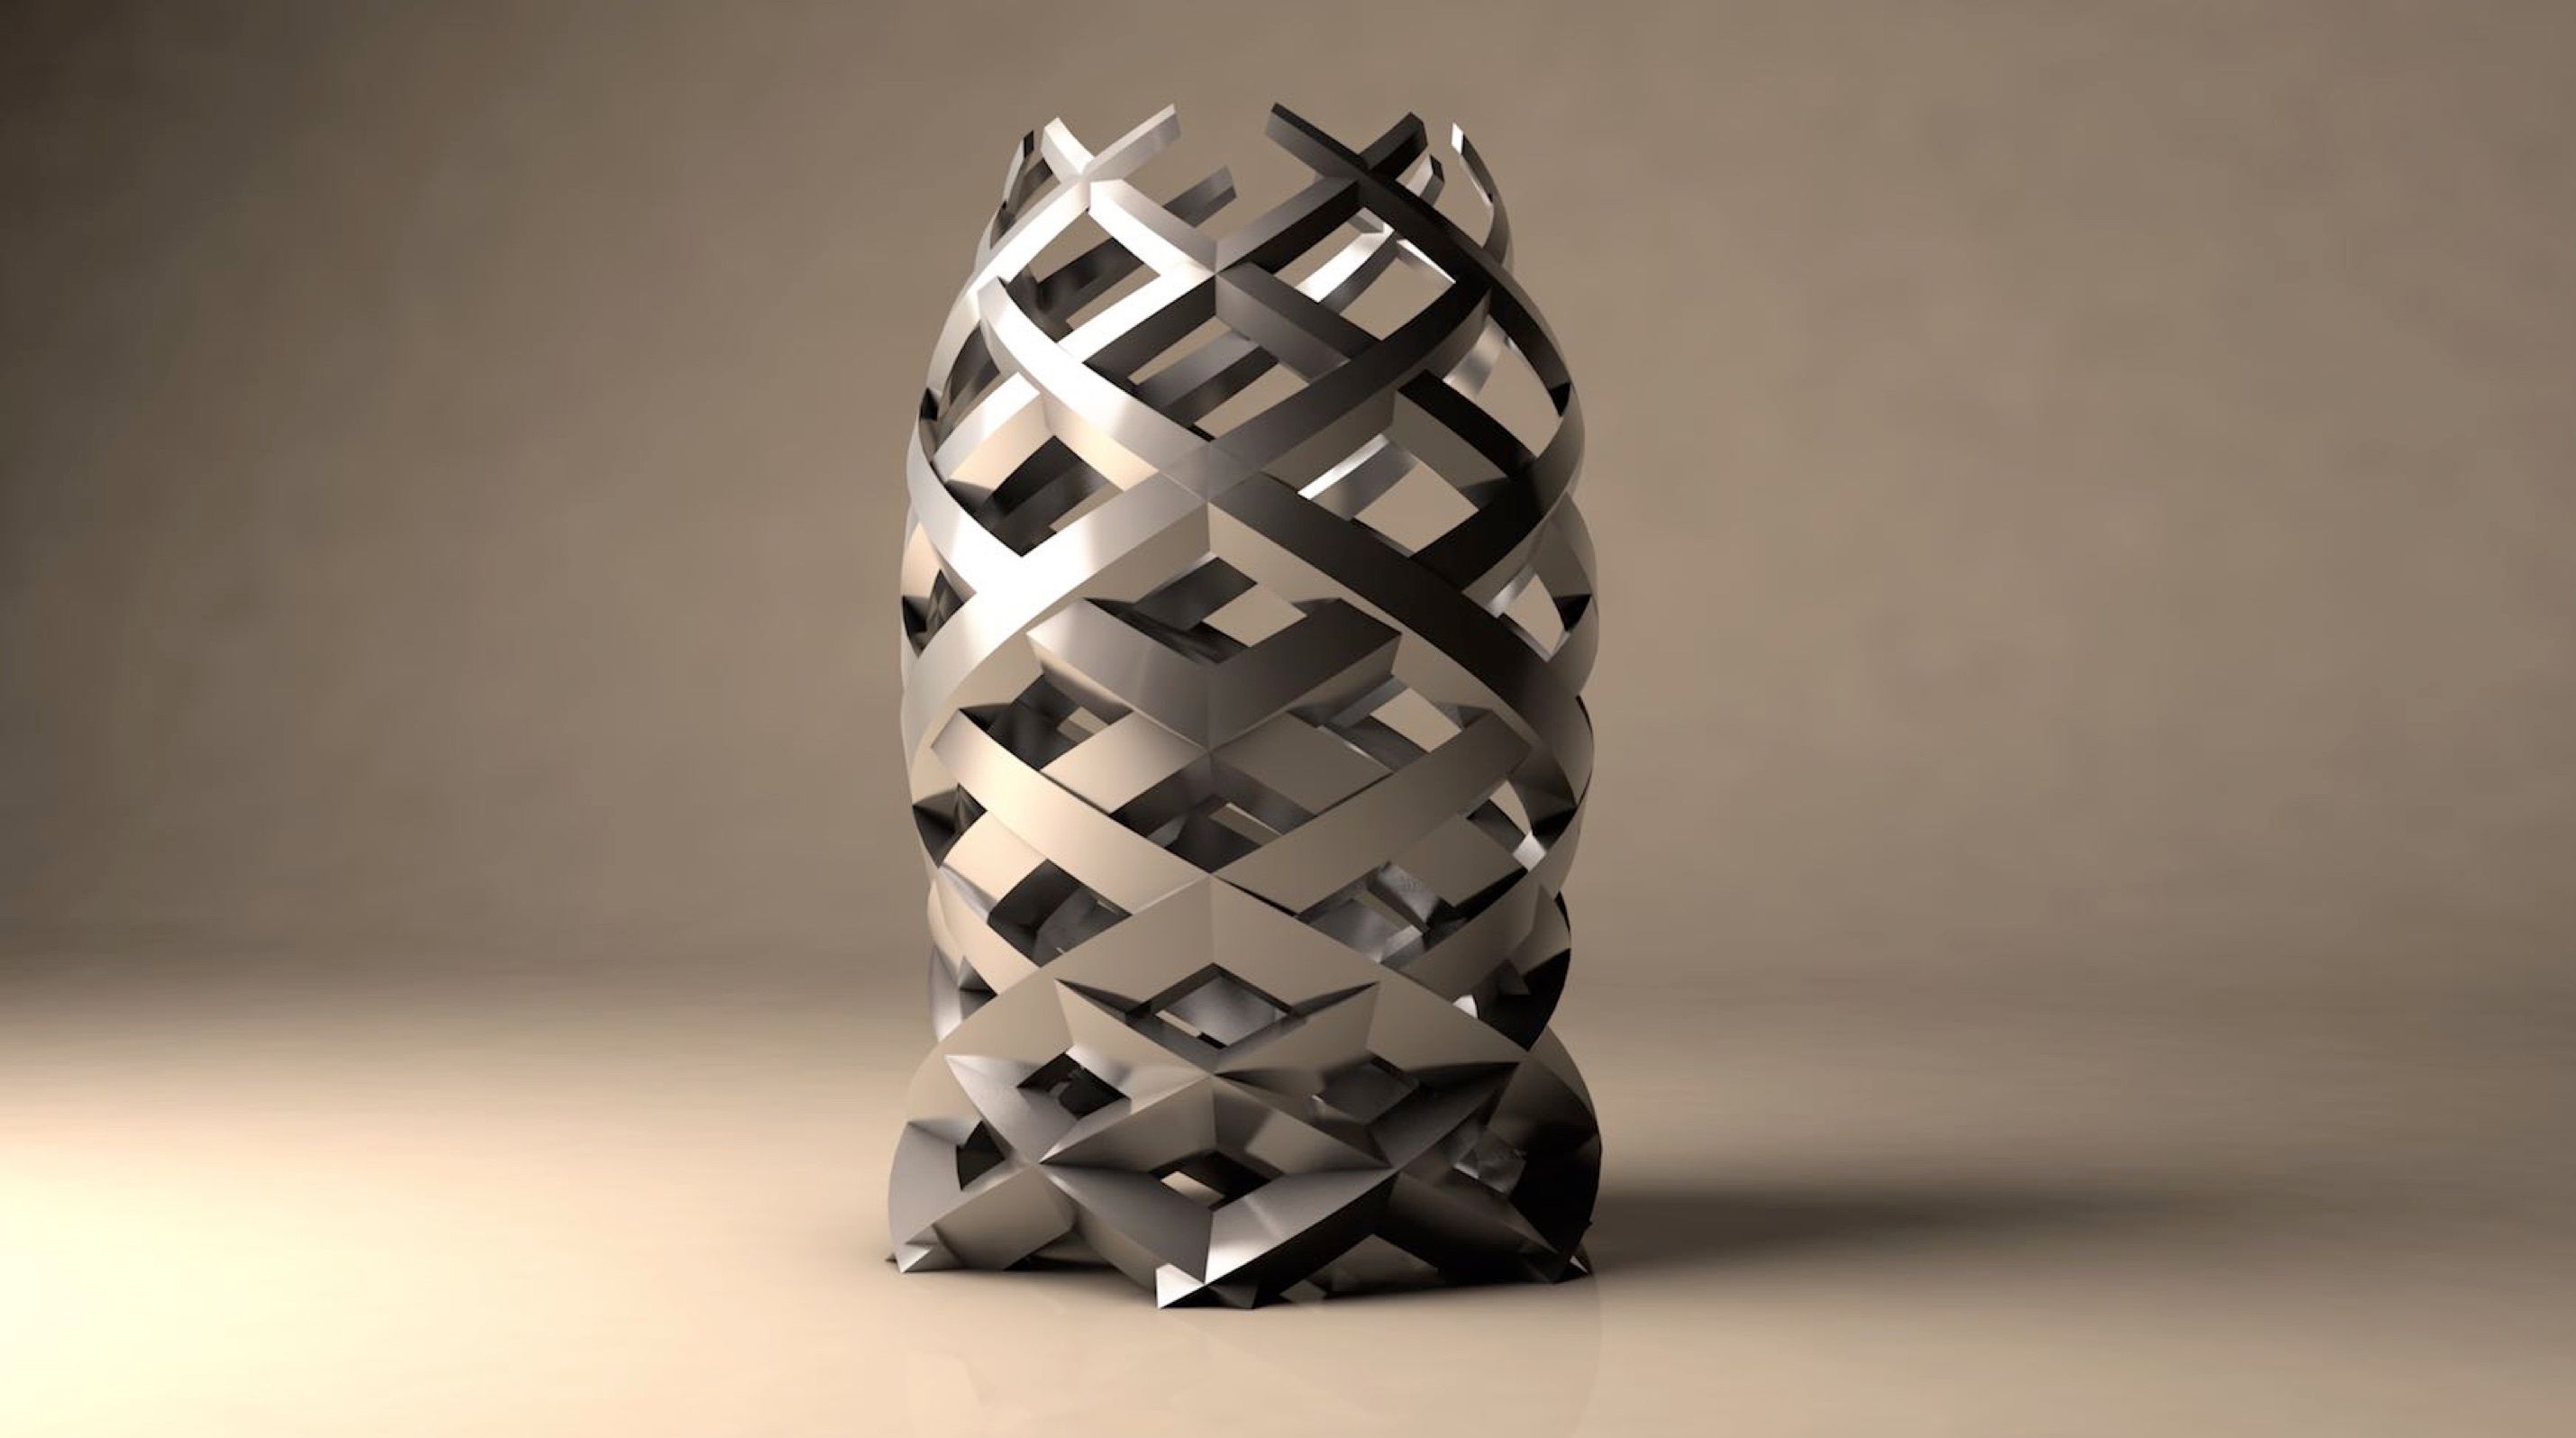 unique shape created with NURBS modeling